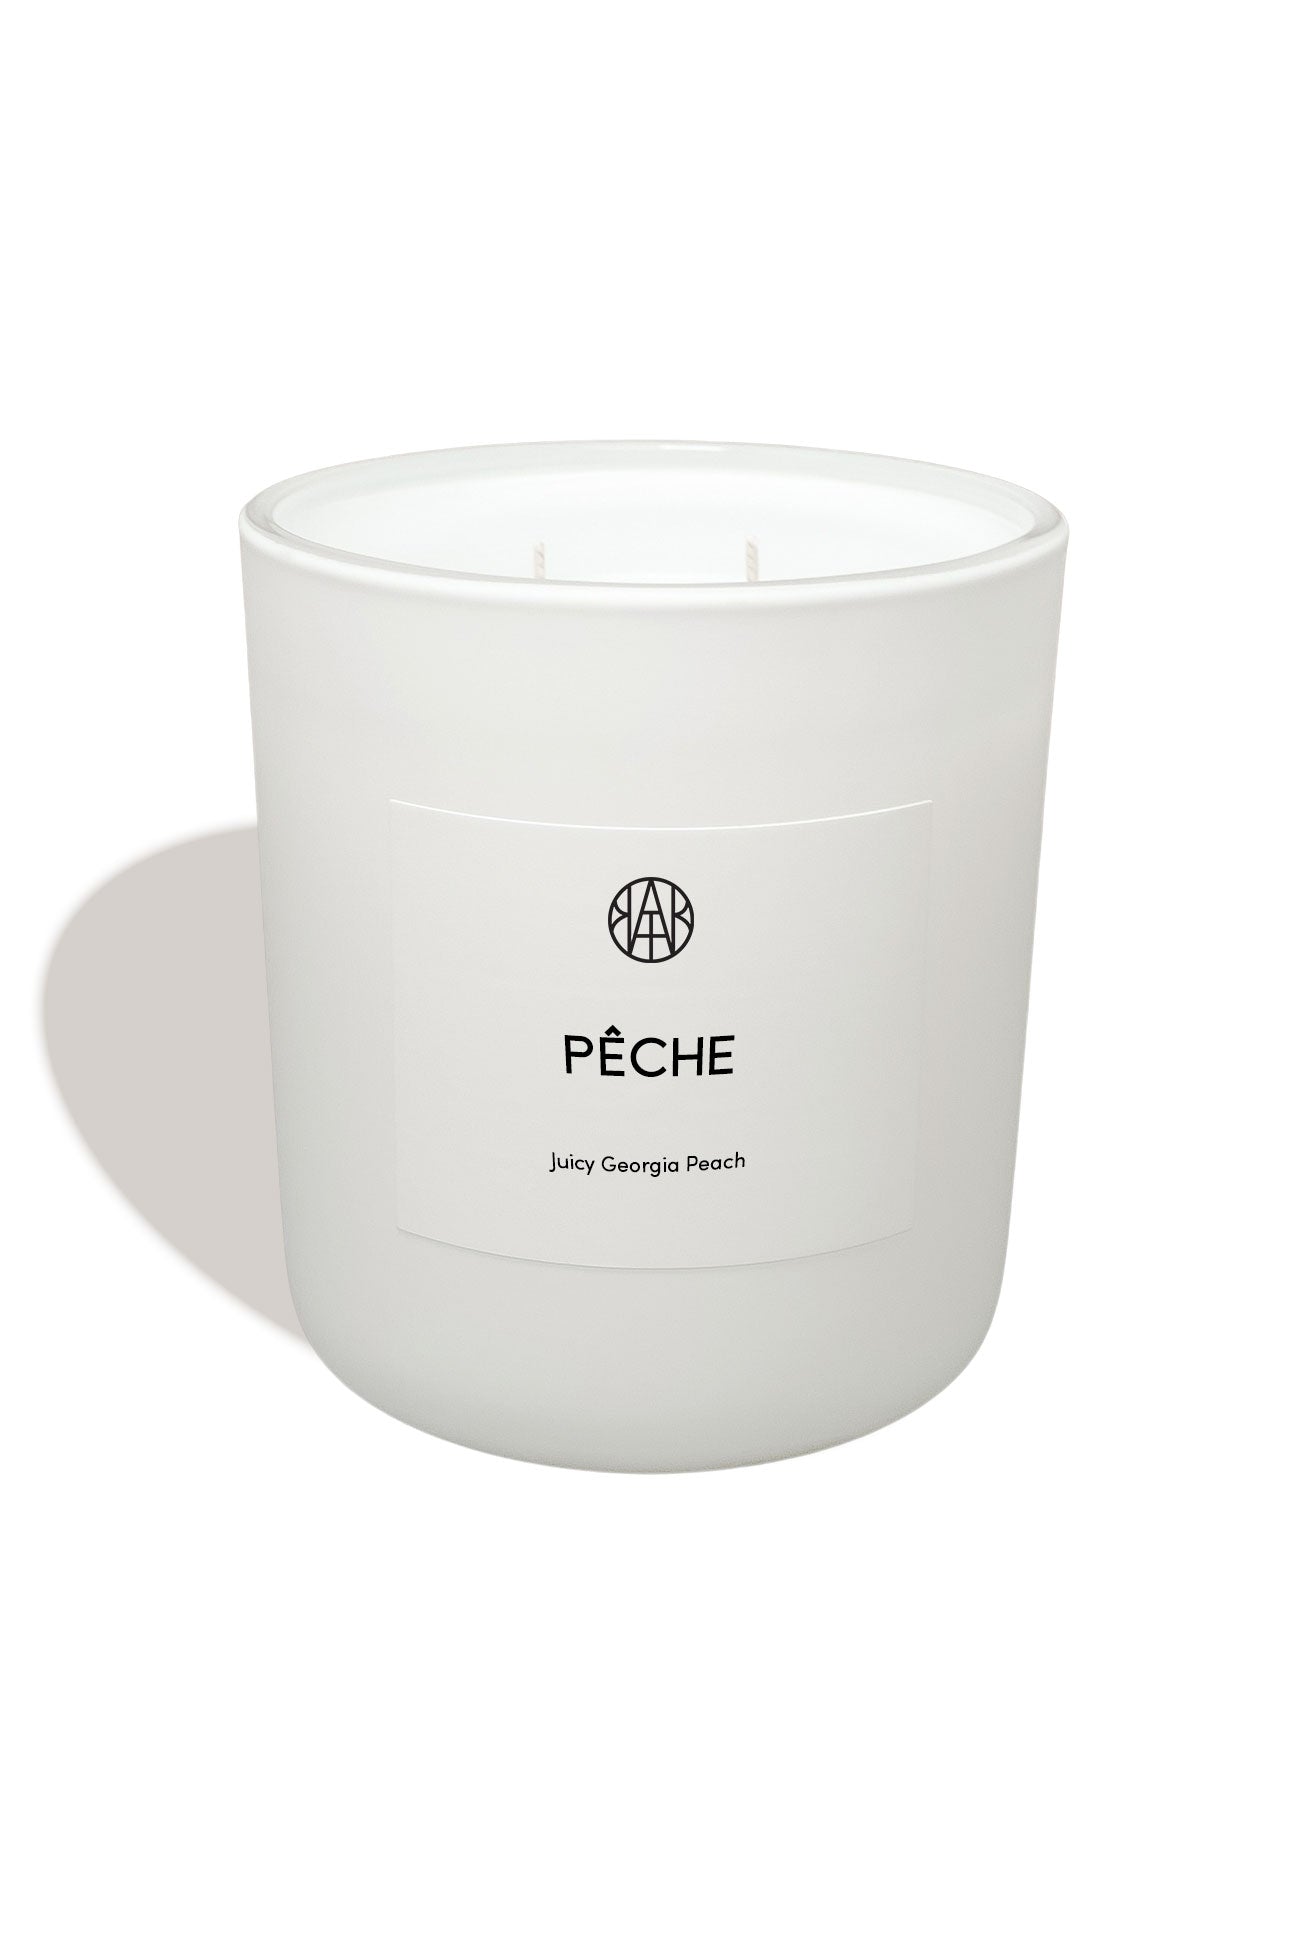 PECHE - Deluxe Candle - AEMBR - Clean Luxury Candles, Wax Melts & Laundry Care